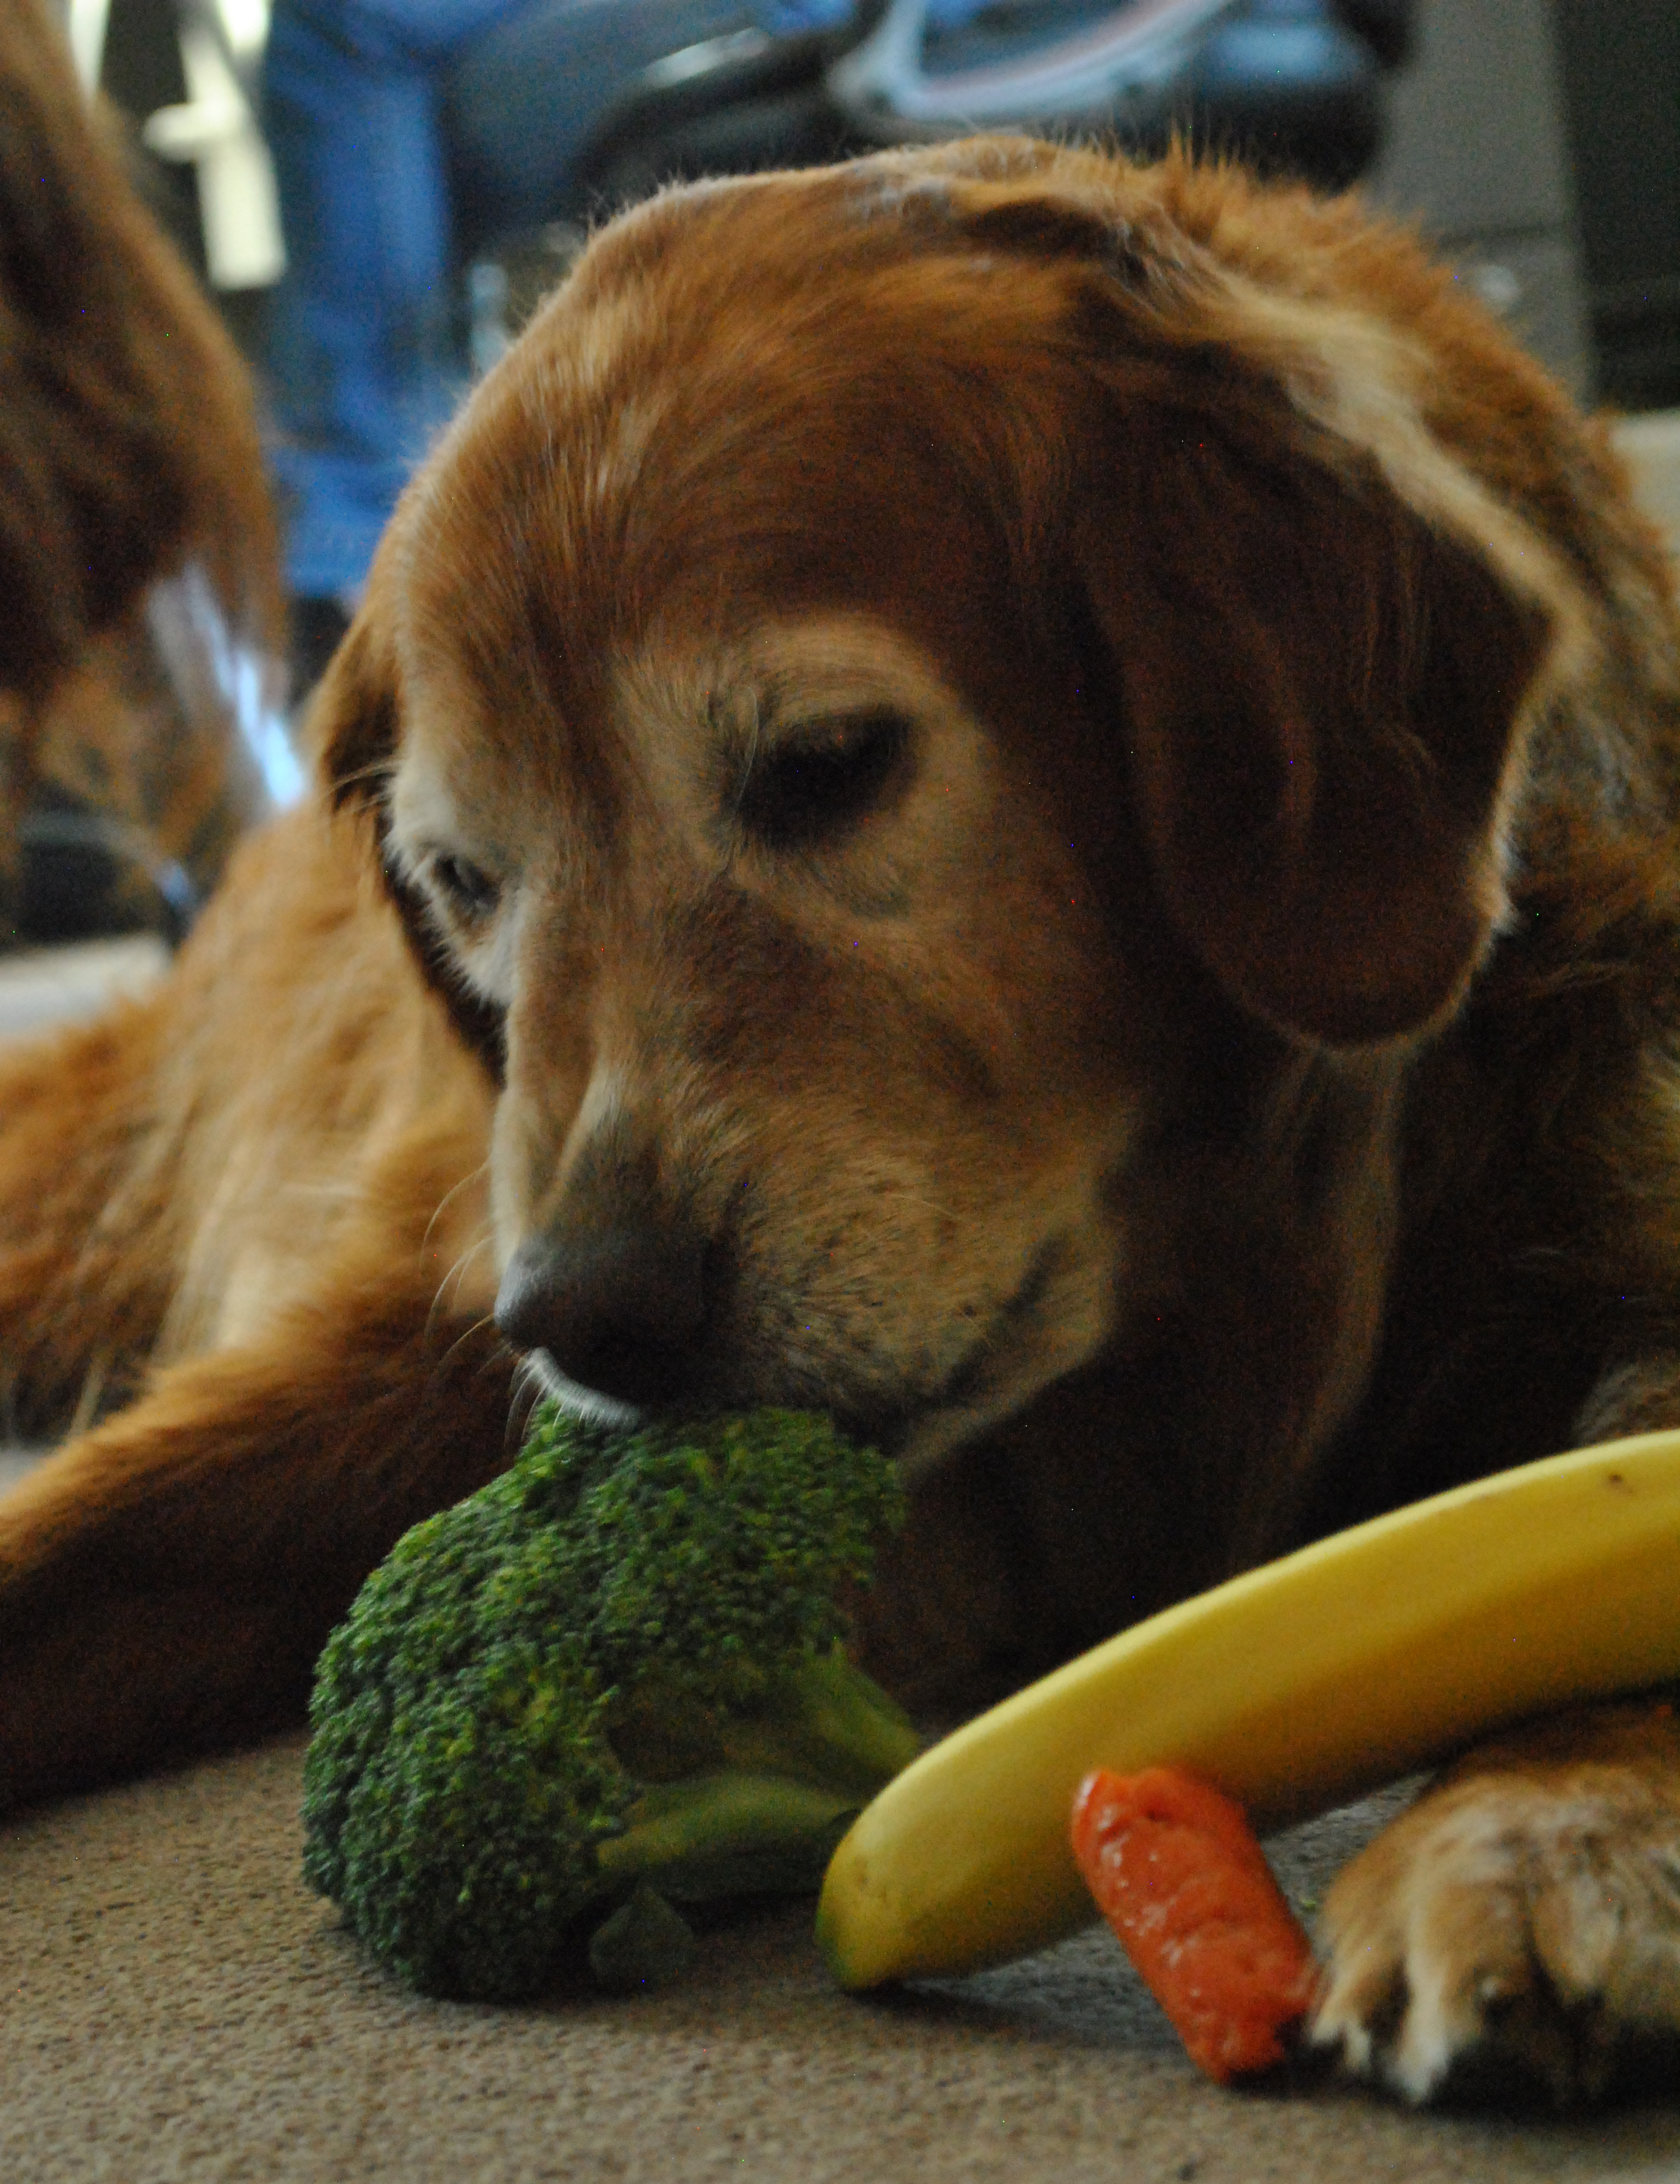 Pet Nutrition: What Are You Feeding Your Dog?